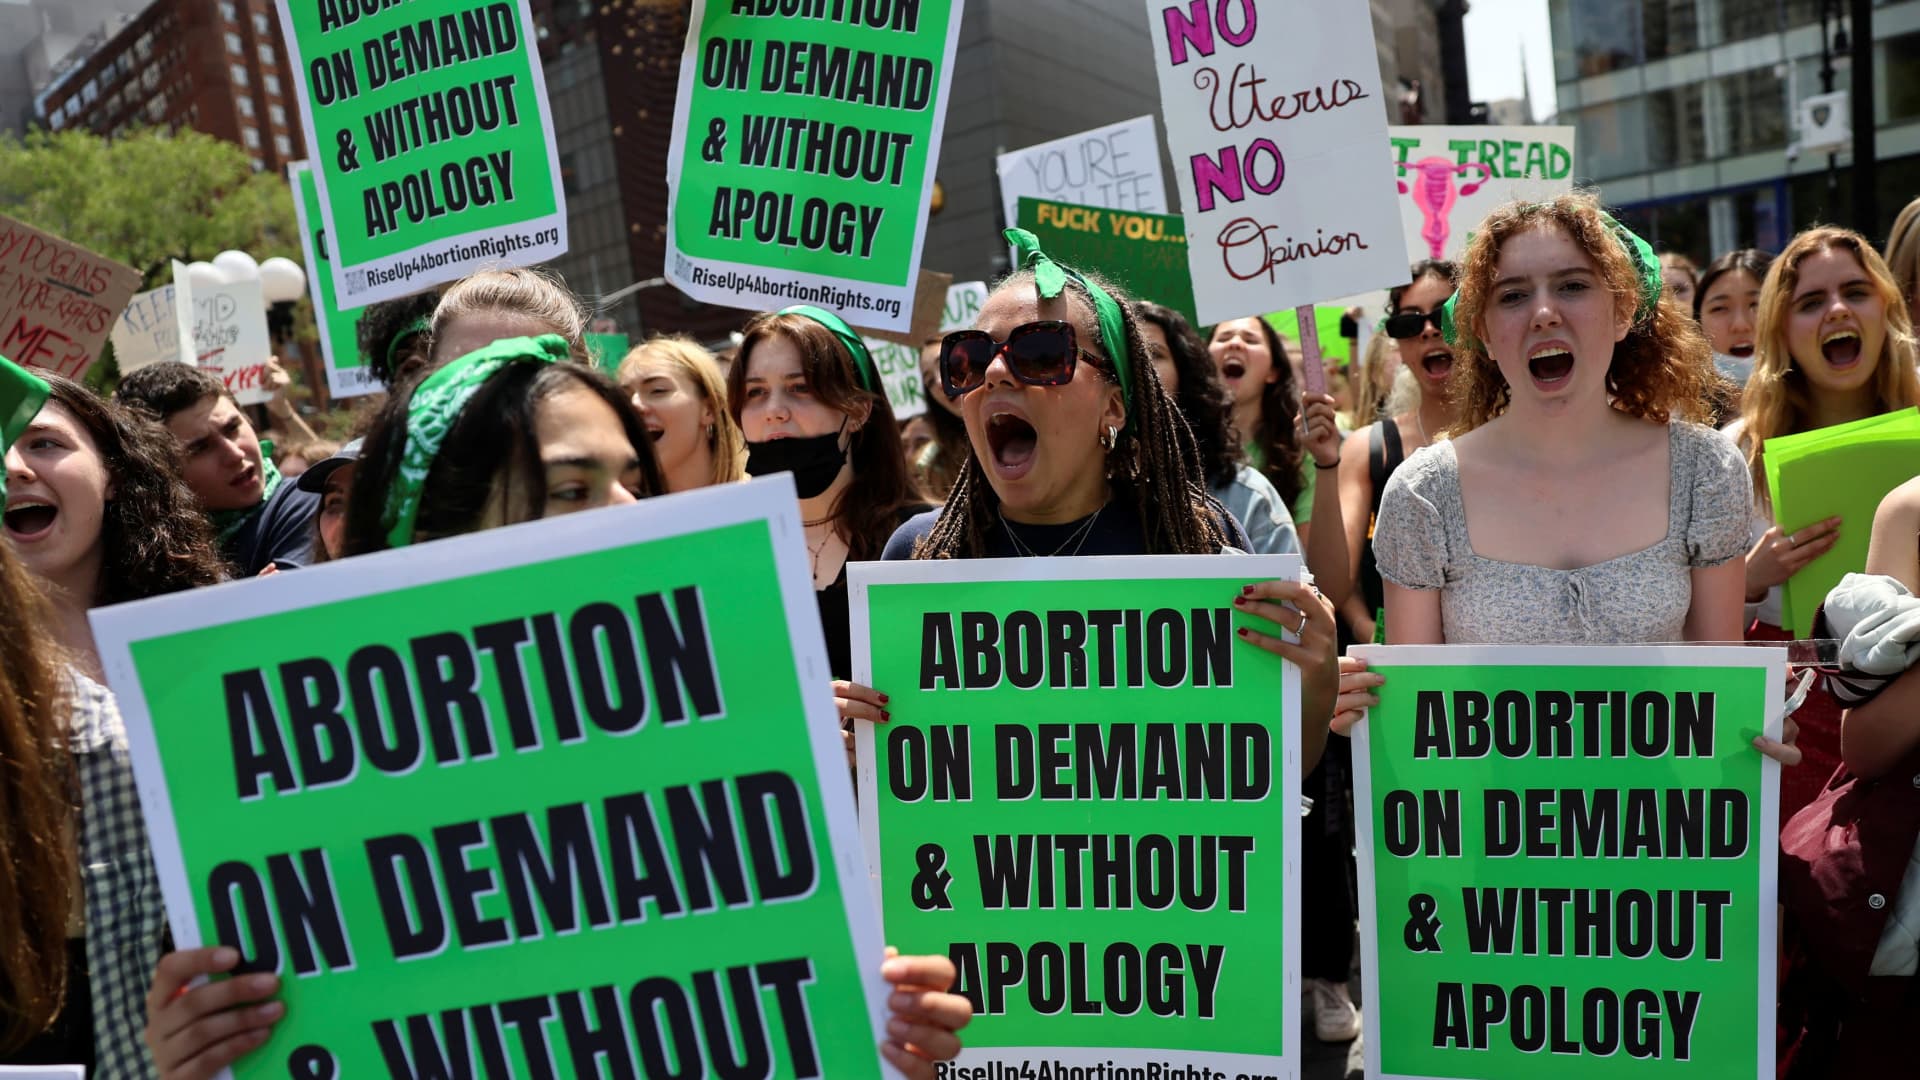 Large employers face tough hurdles to provide abortion benefits if Roe is overturned